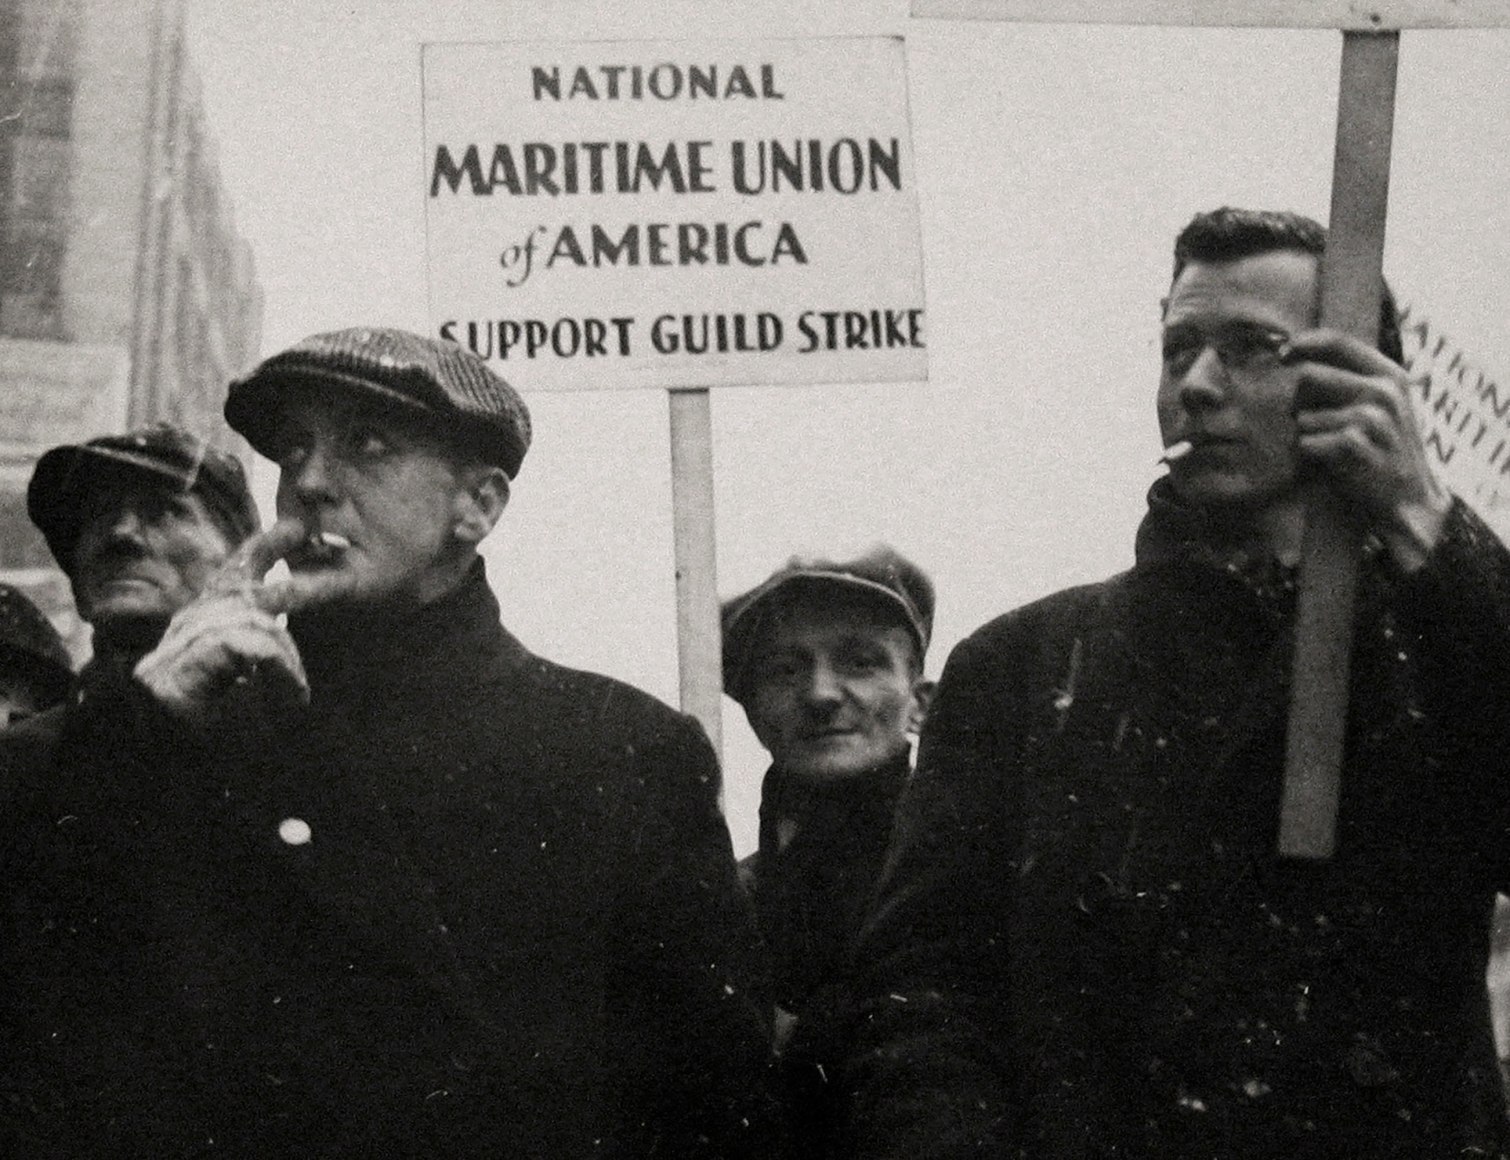 19. Gordon Coster, W.P.A. Parade, Chicago, 1939. Four men walk in black coats on a snowy day, smoking cigarettes. One holds a sign that reads &quot;National Maritime Union of America Support Guild Strike&quot;